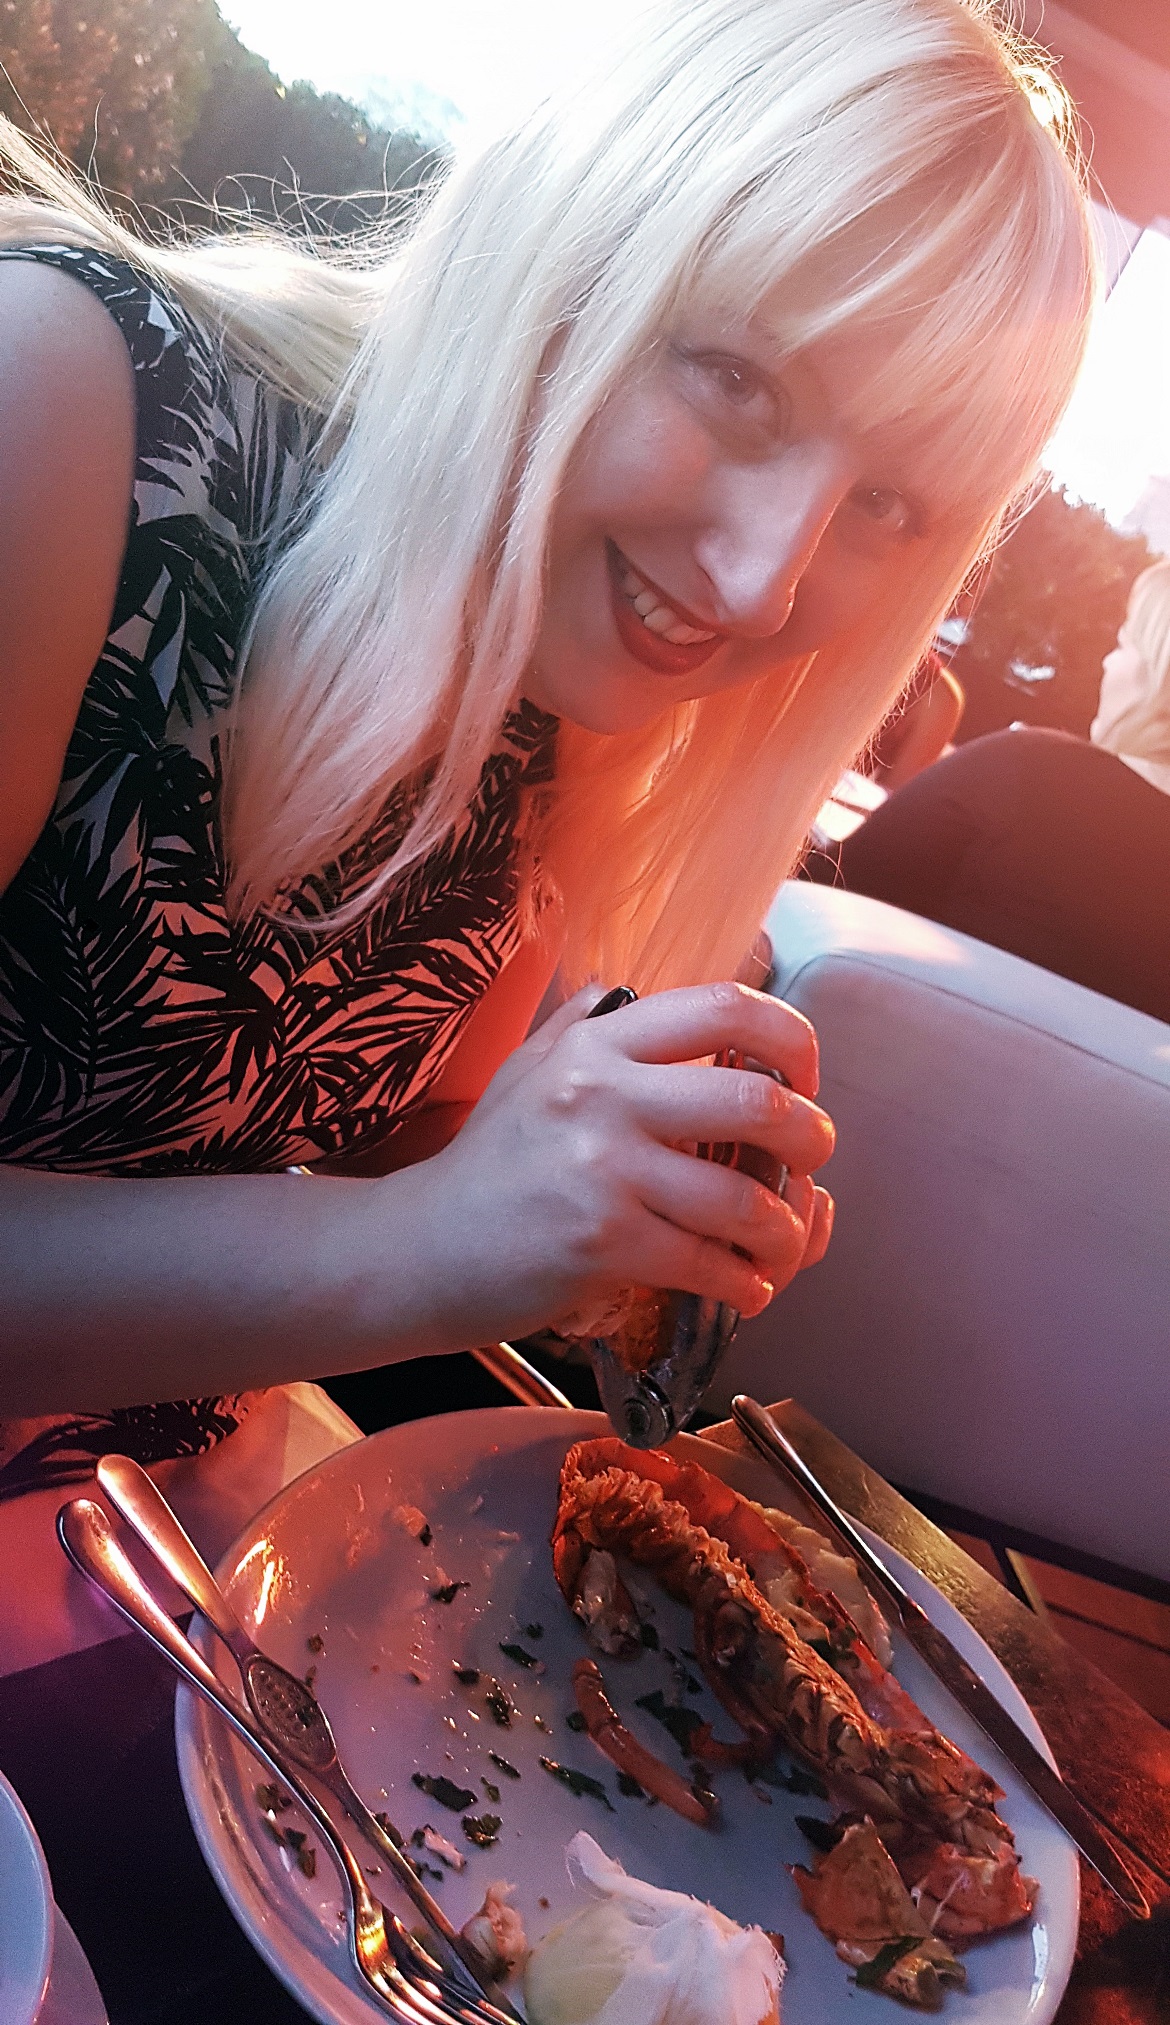 Trying to eat lobster at Piccolino Ilkley - September Monthly Recap by BeckyBecky Blogs